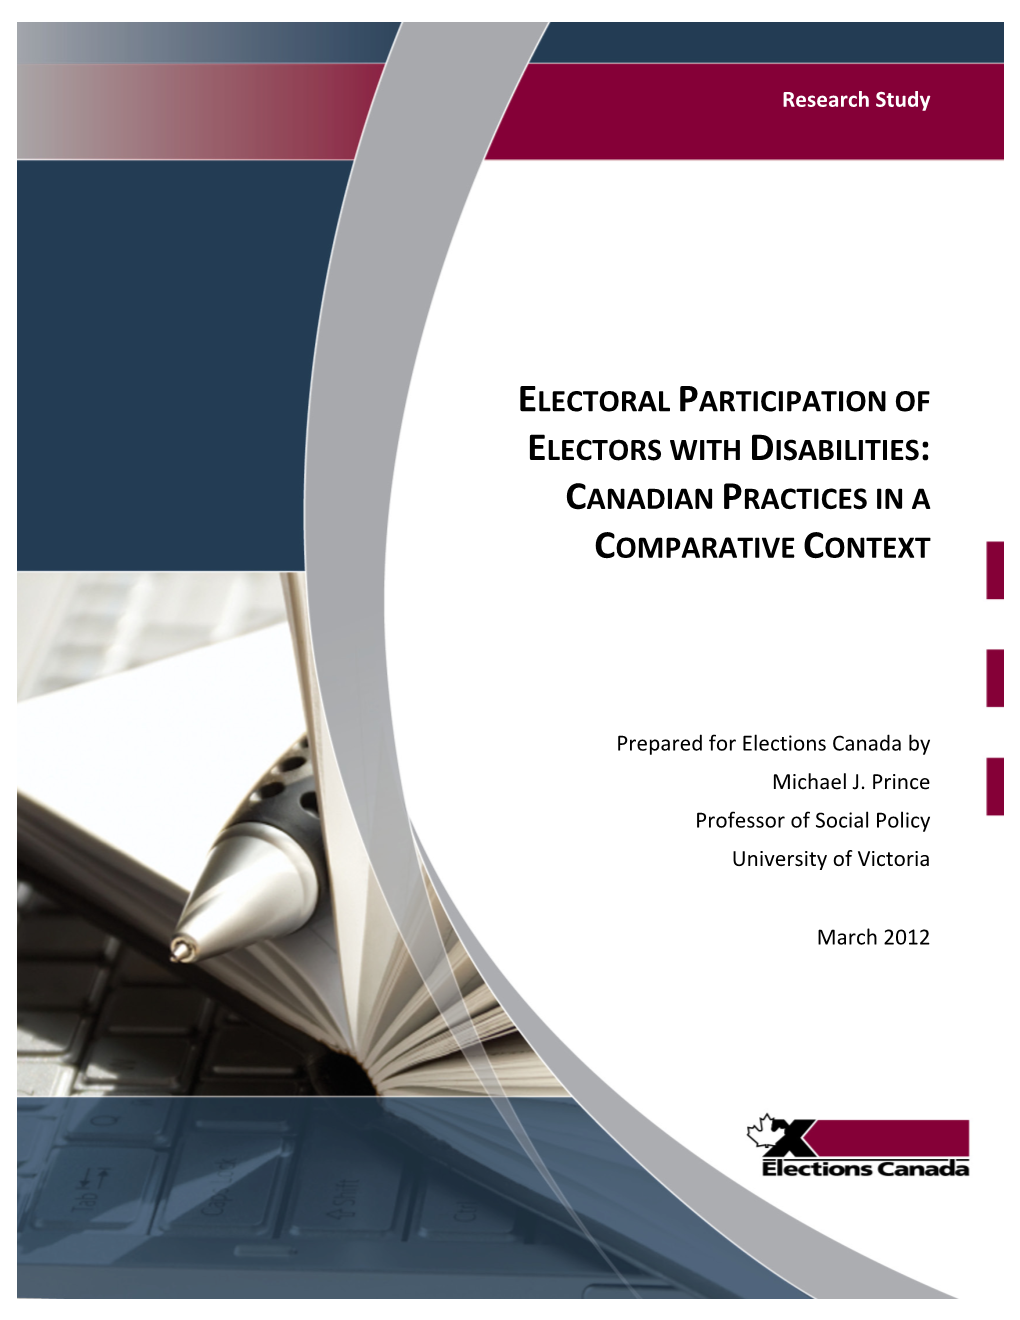 Electoral Participation of Electors with Disabilities: Canadian Practices in a Comparative Context